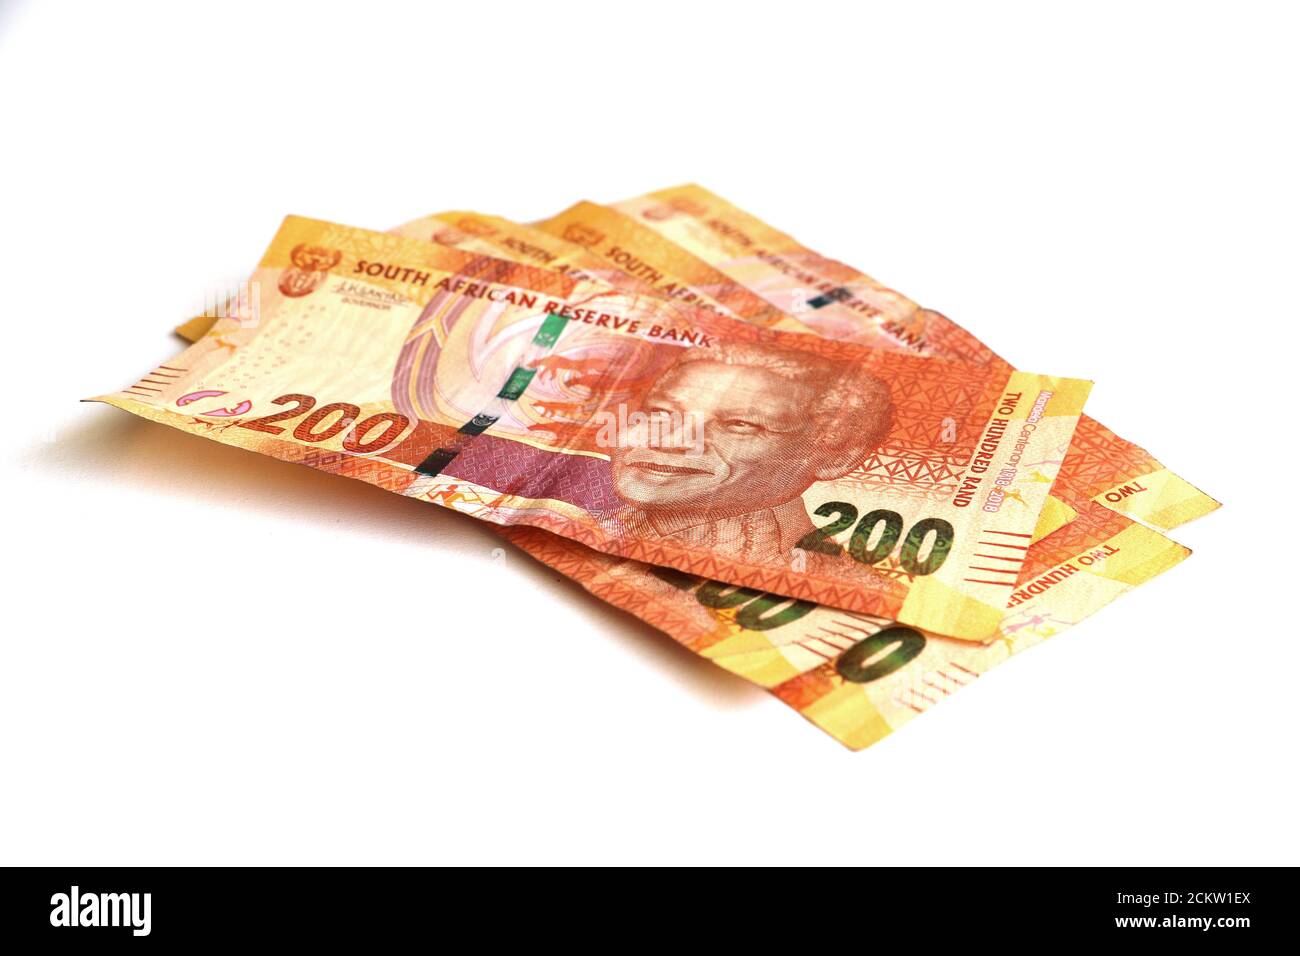 An isolated pile of two hundred rand notes currency from South Africa Stock Photo